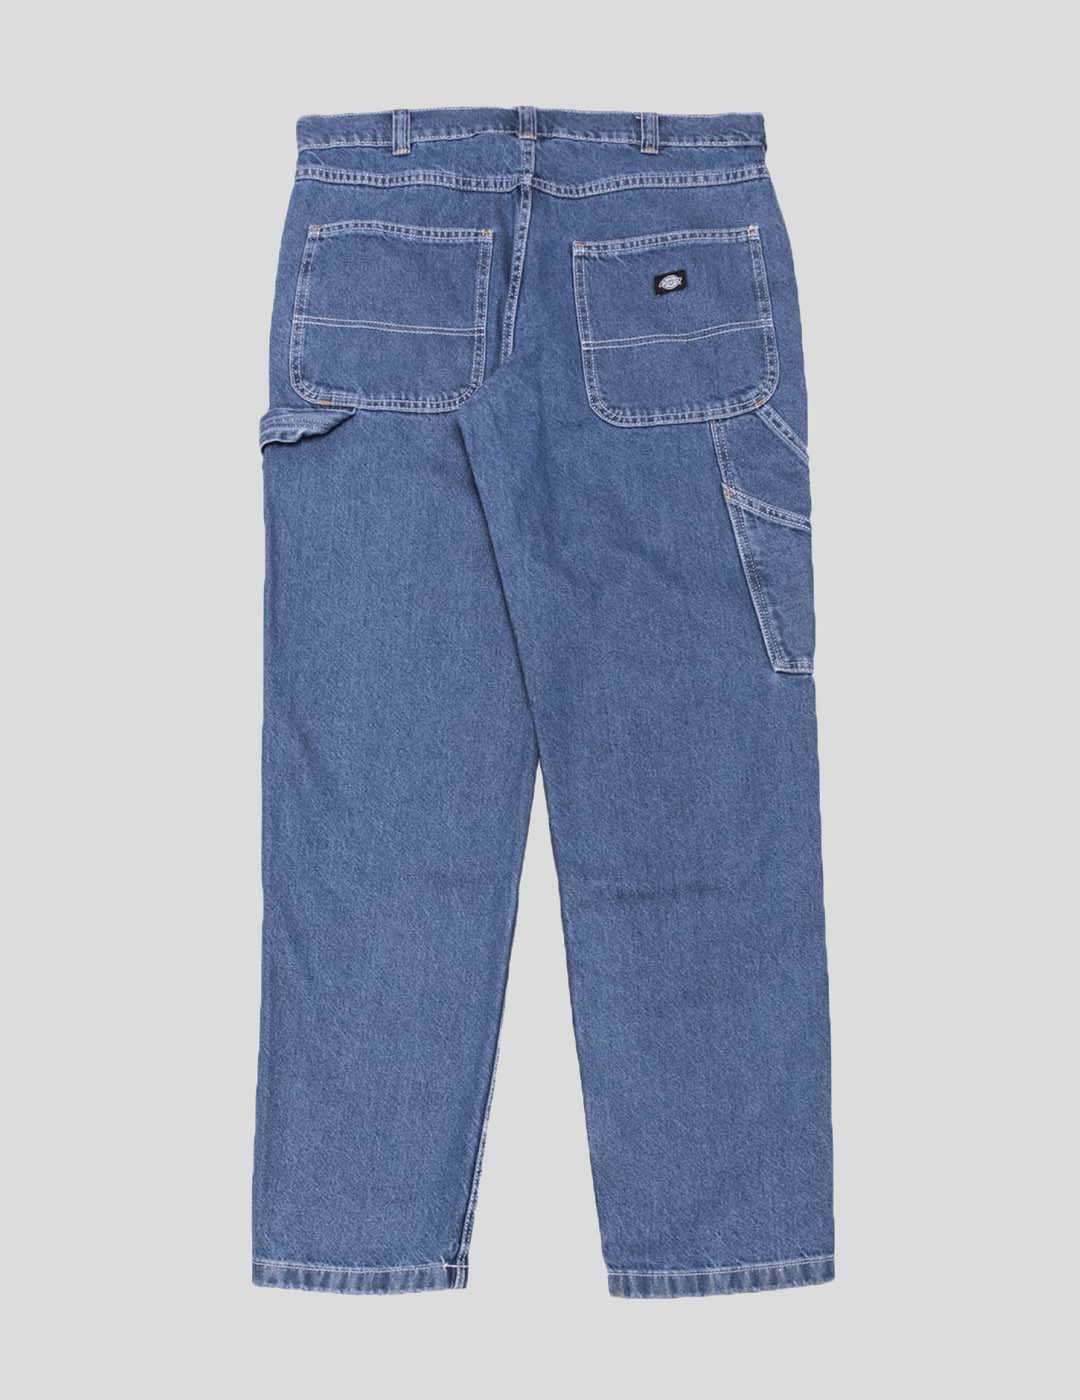 Rinsed Denim in Blue for Men Dickies Garyville Tapered Jeans Mens Clothing Jeans Tapered jeans Save 40% 